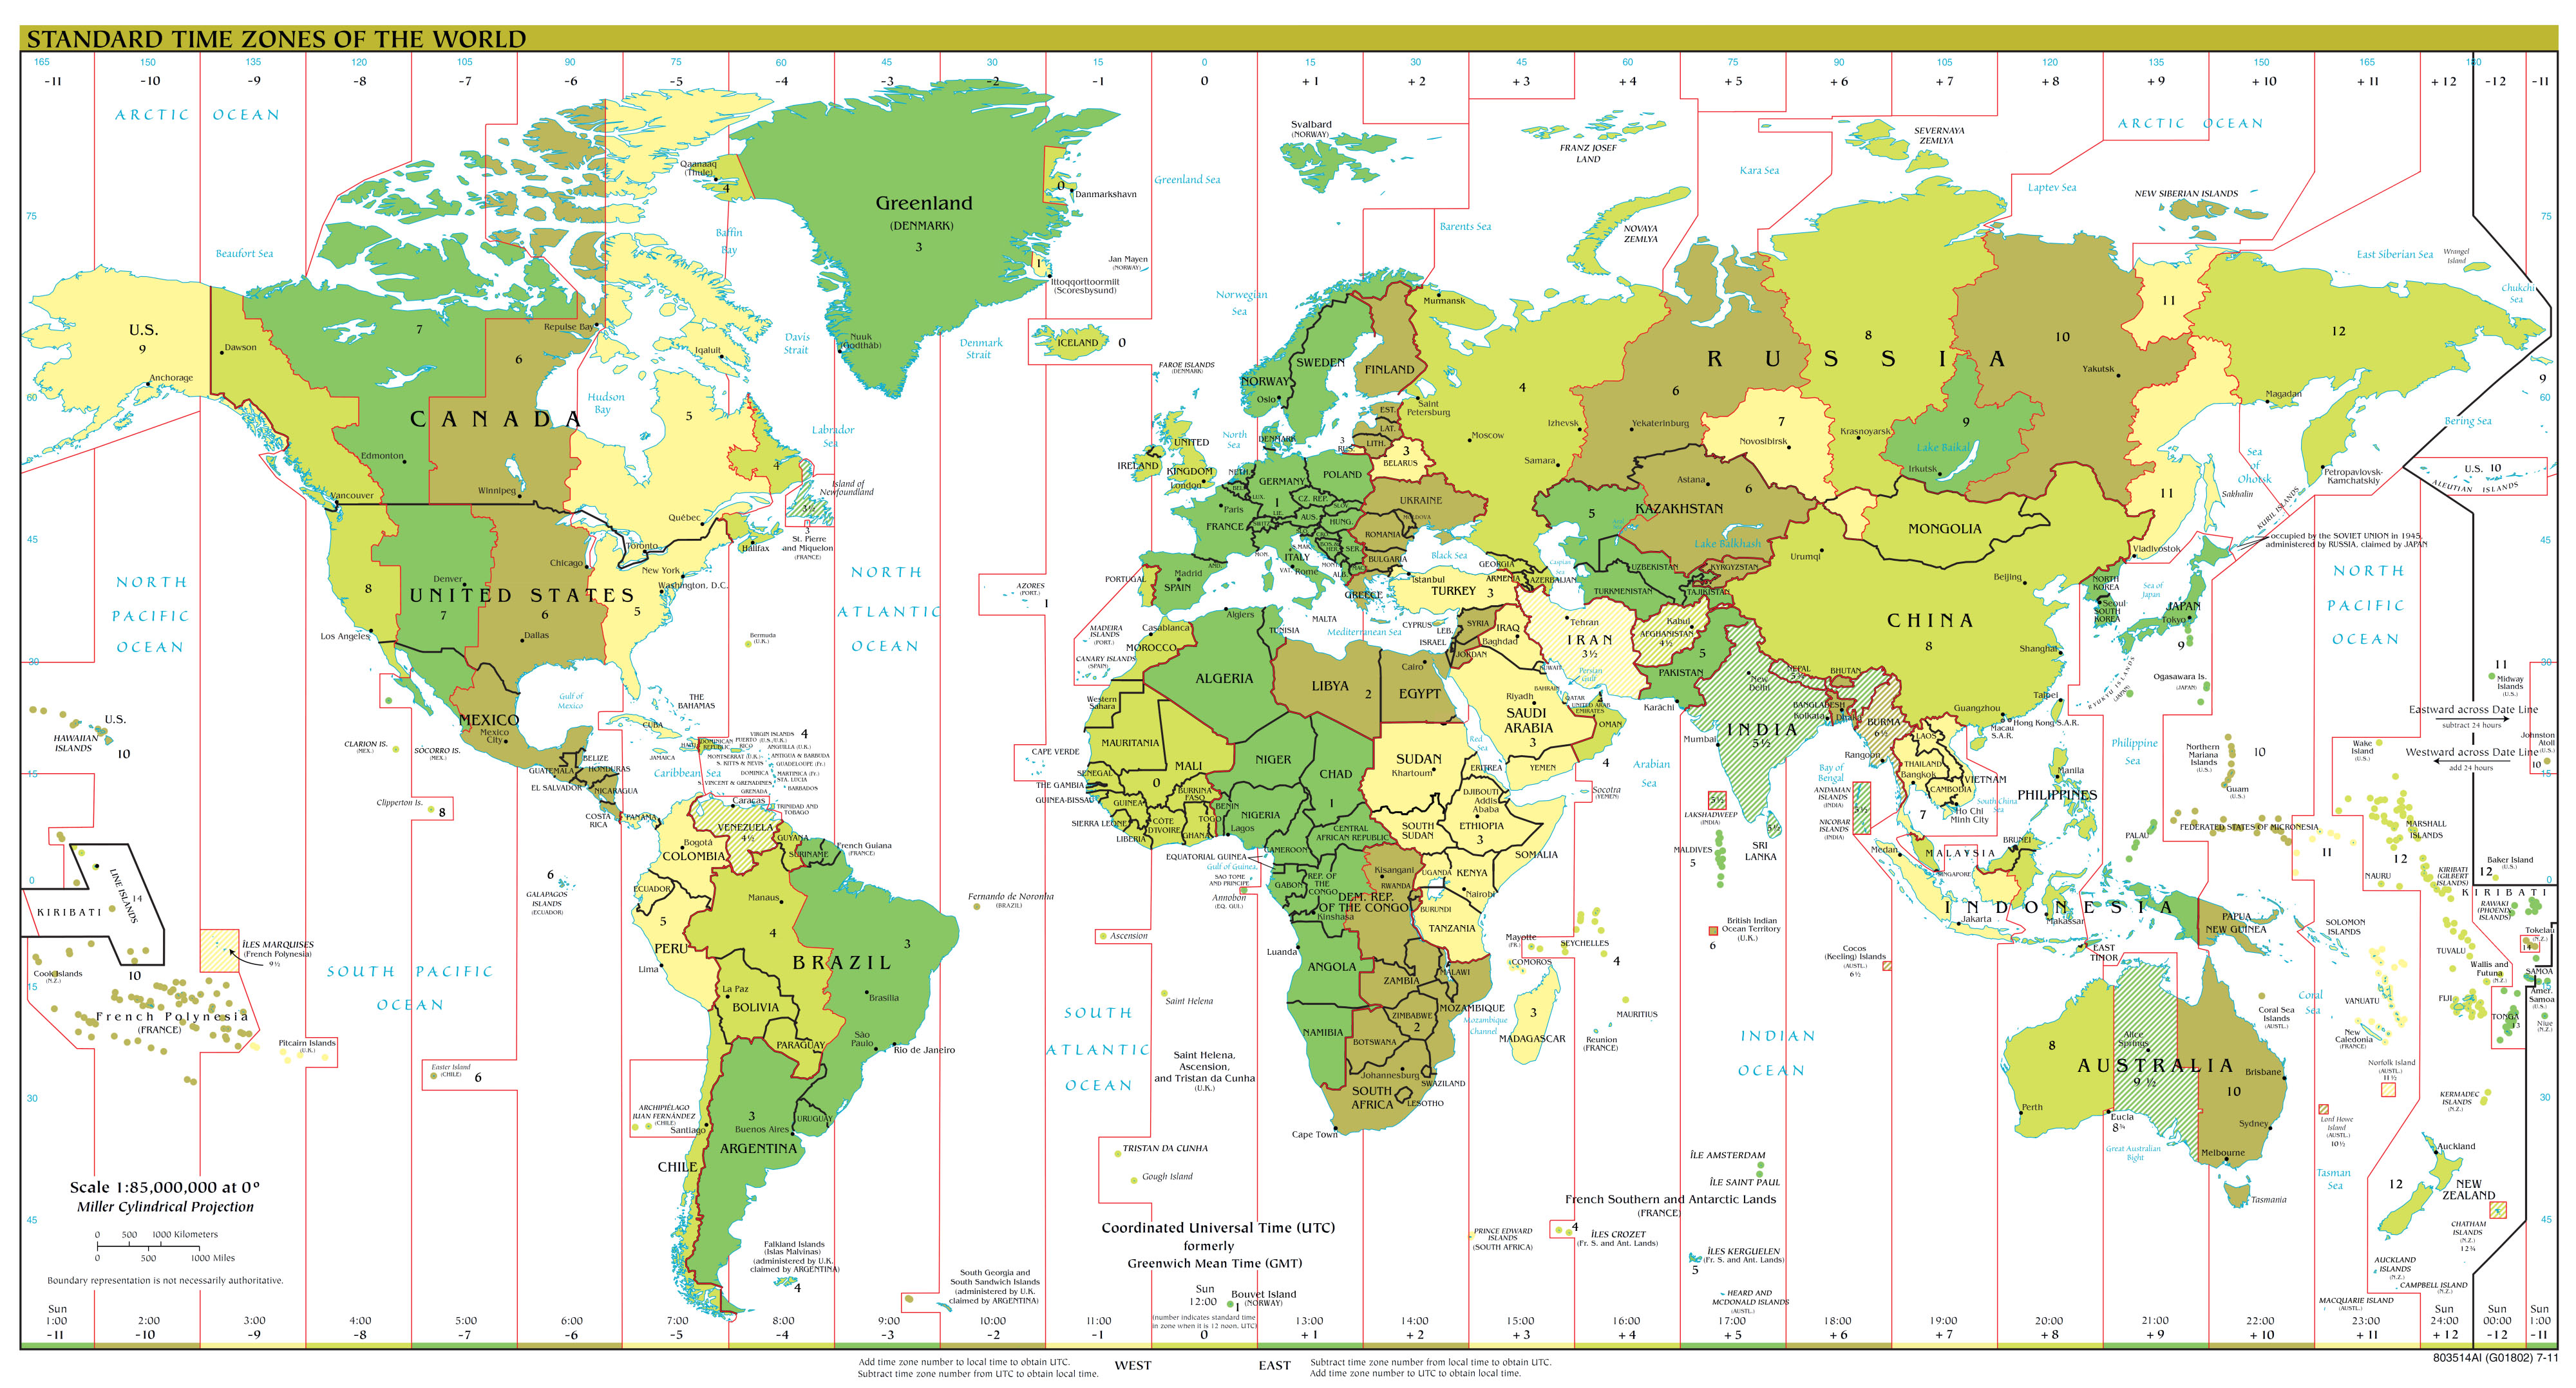 Time Zones and Coordinated Universal Time